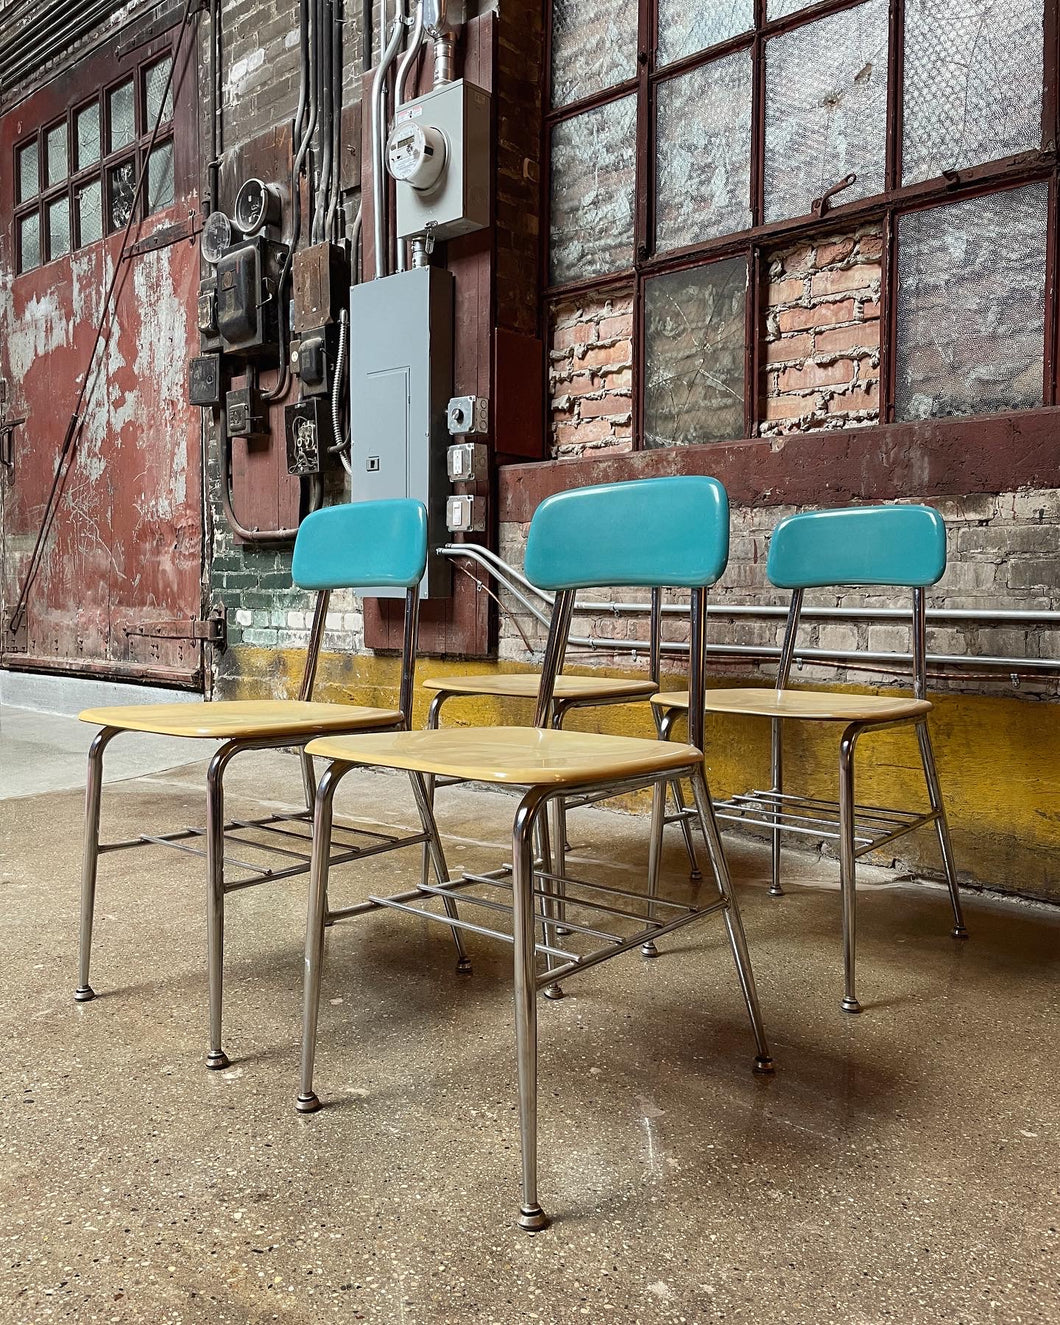 Two-Tone Heywood Wakefield Chairs, 14 Available